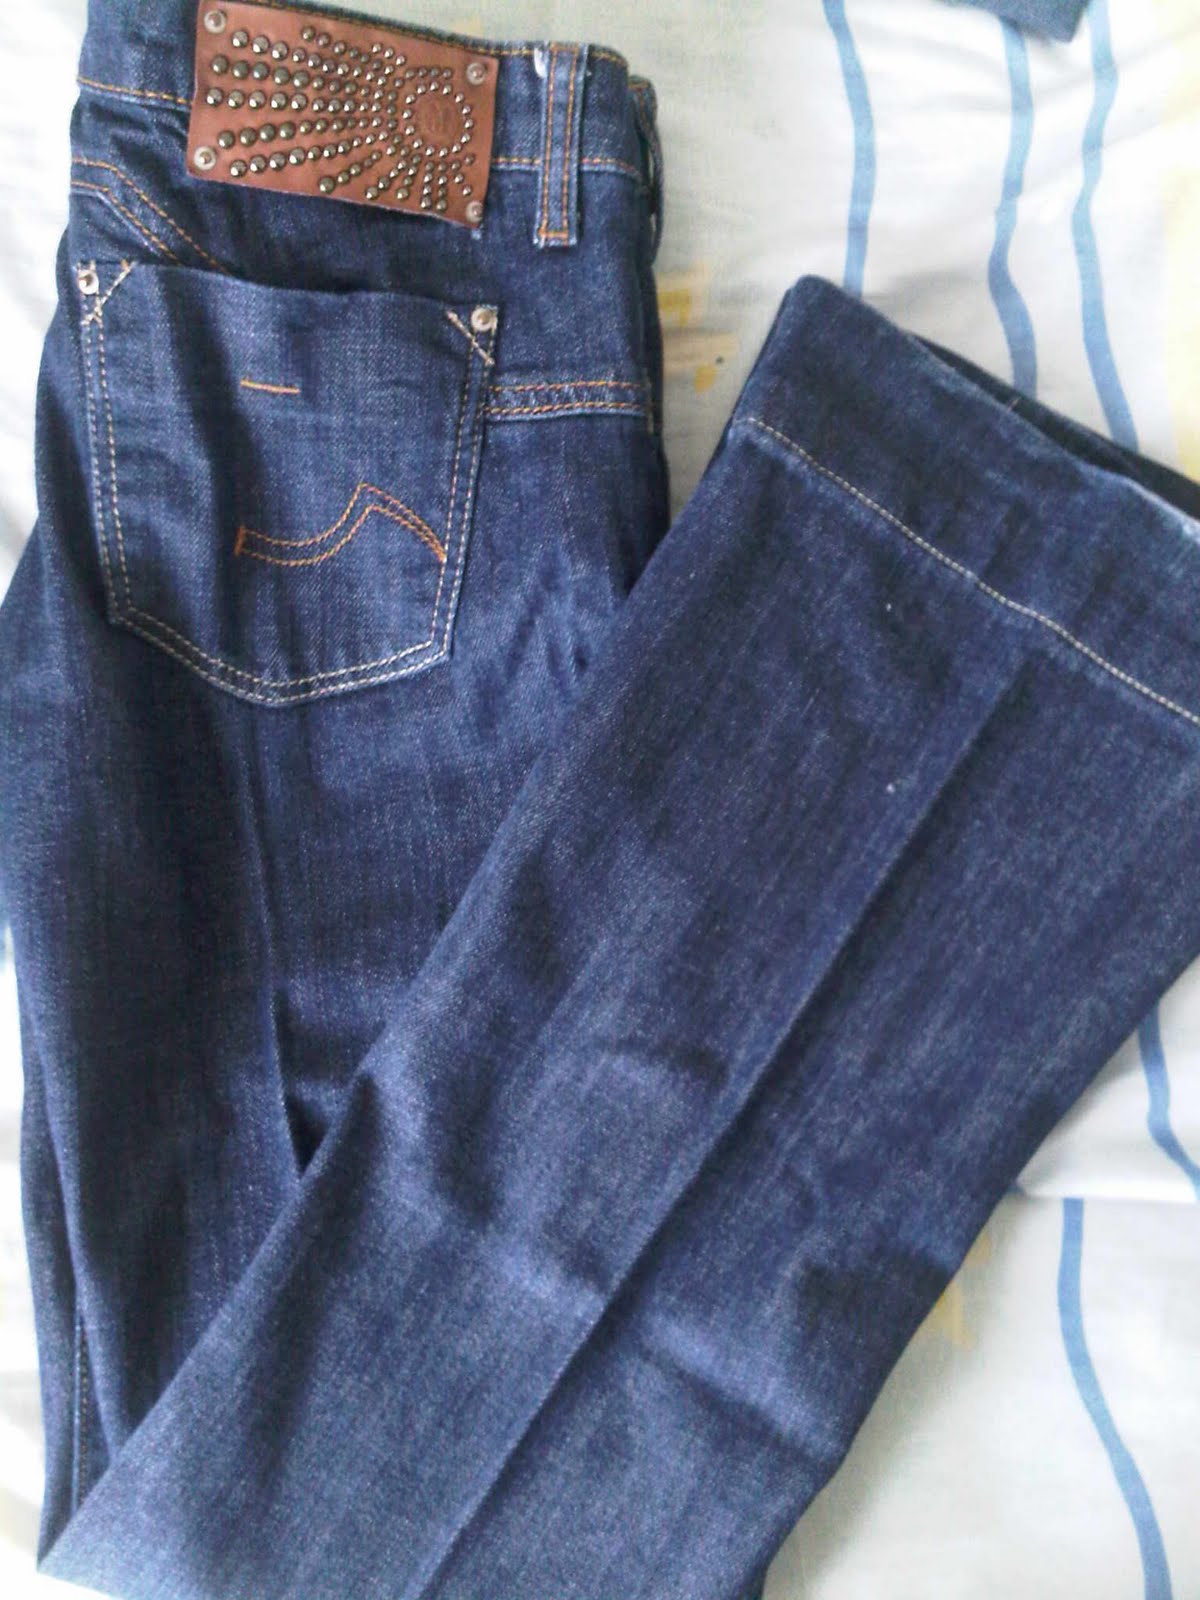 mng jeans price